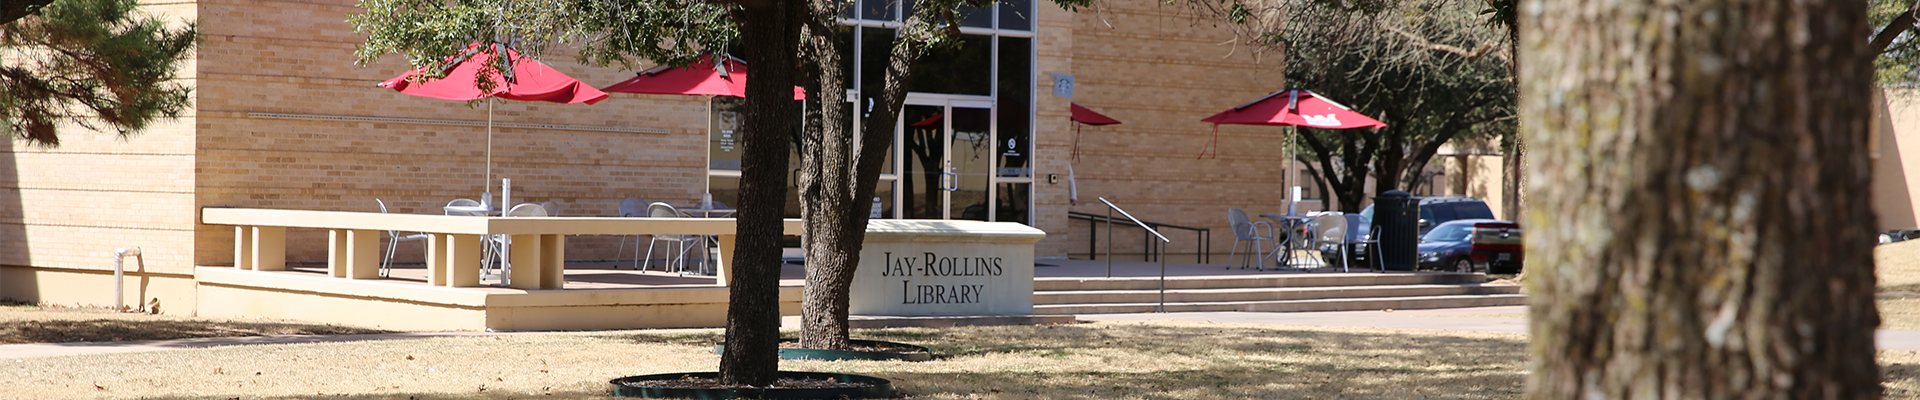 Jay-Rollins Library